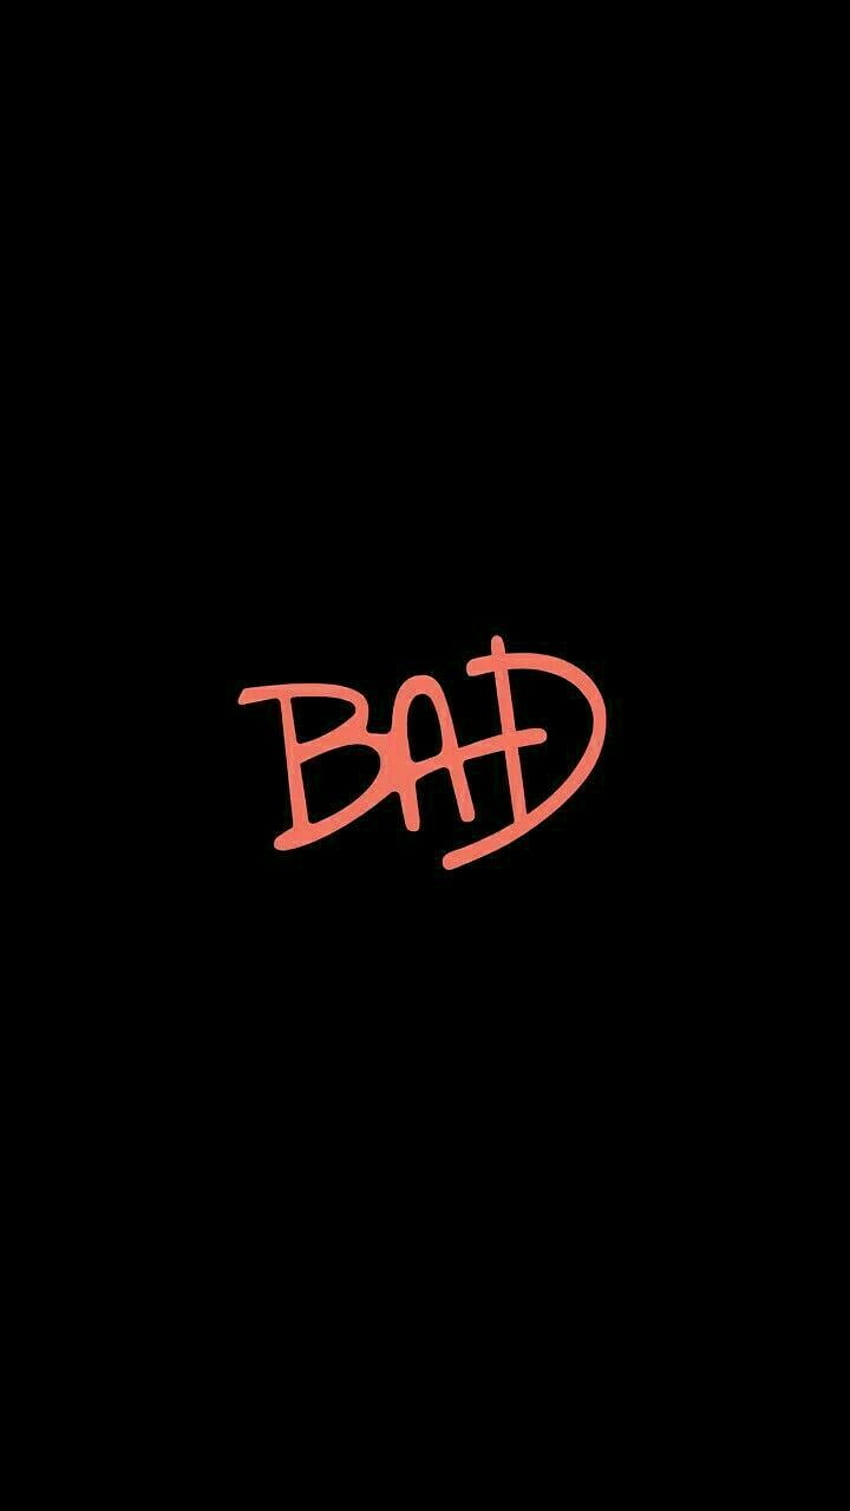 Me Kay Luh: On ♥home Lock Screen♥, Bad Girl Quotes HD phone wallpaper